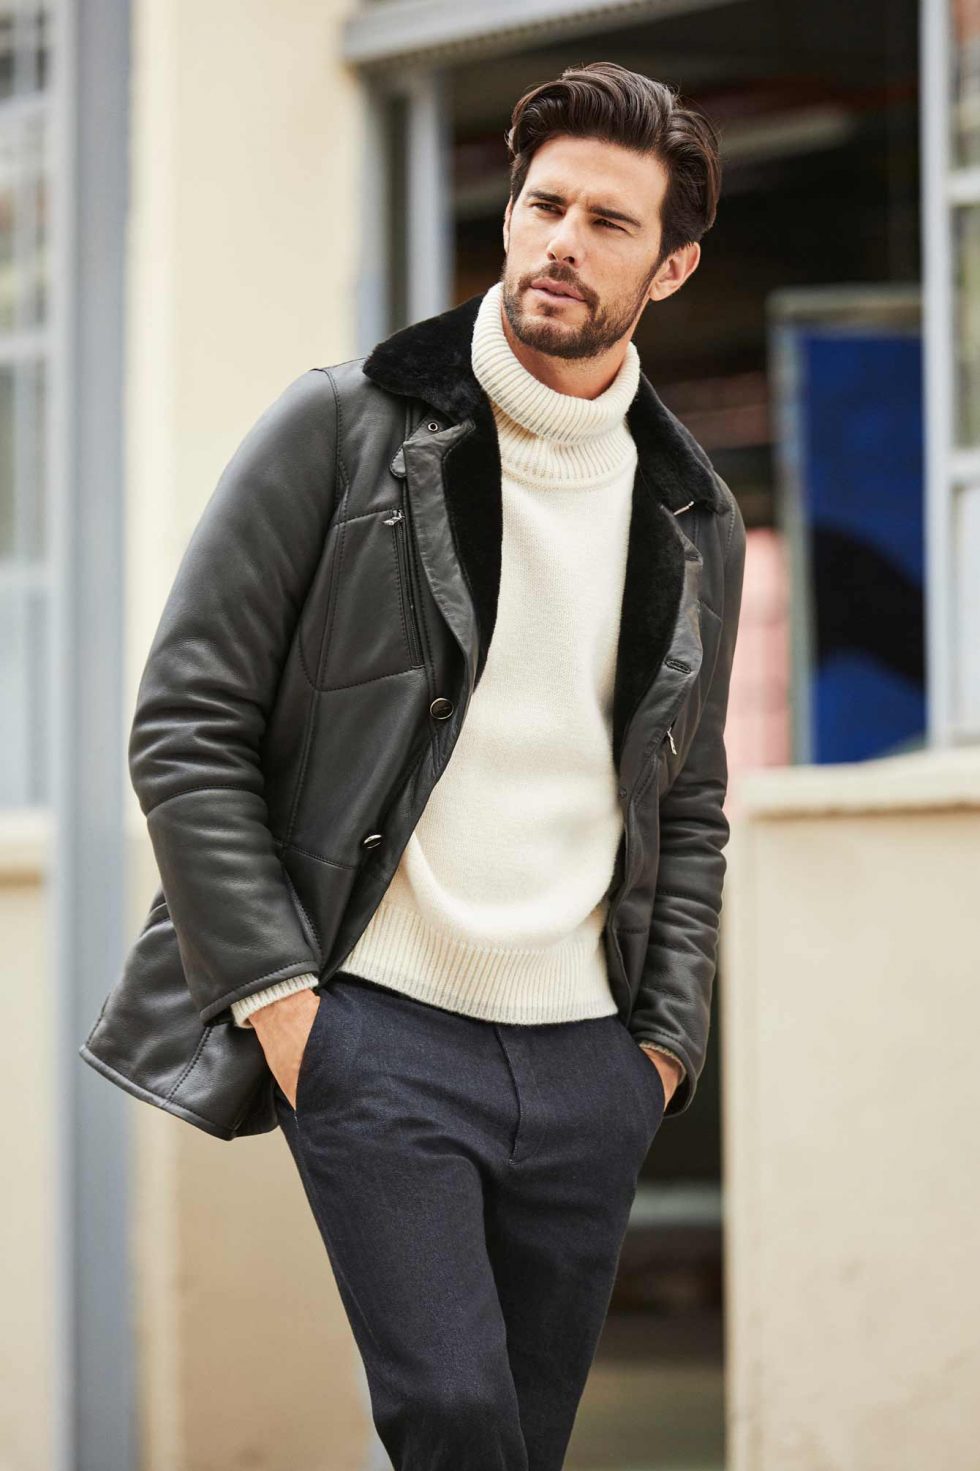 50 Stylish Ways to Wear A Shearling Coat: Fashion Tips for Men [Images]